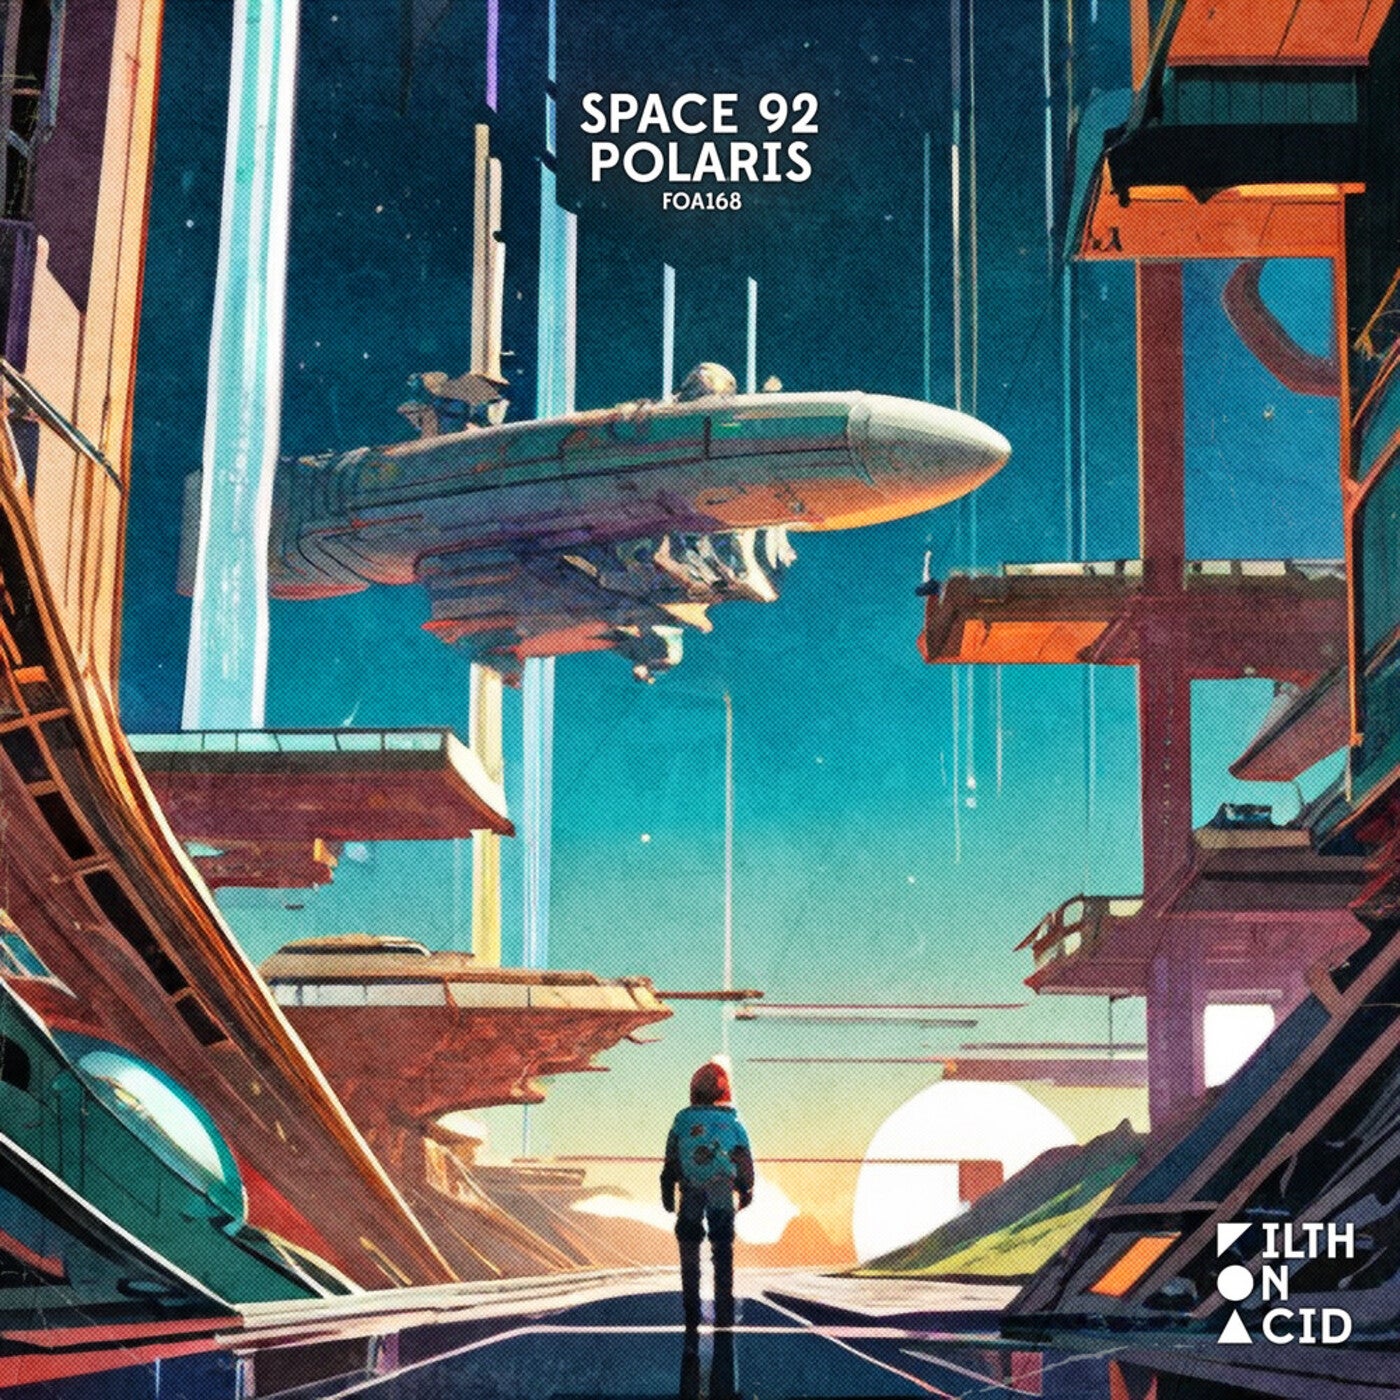 image cover: Space 92 - Polaris on Filth on Acid